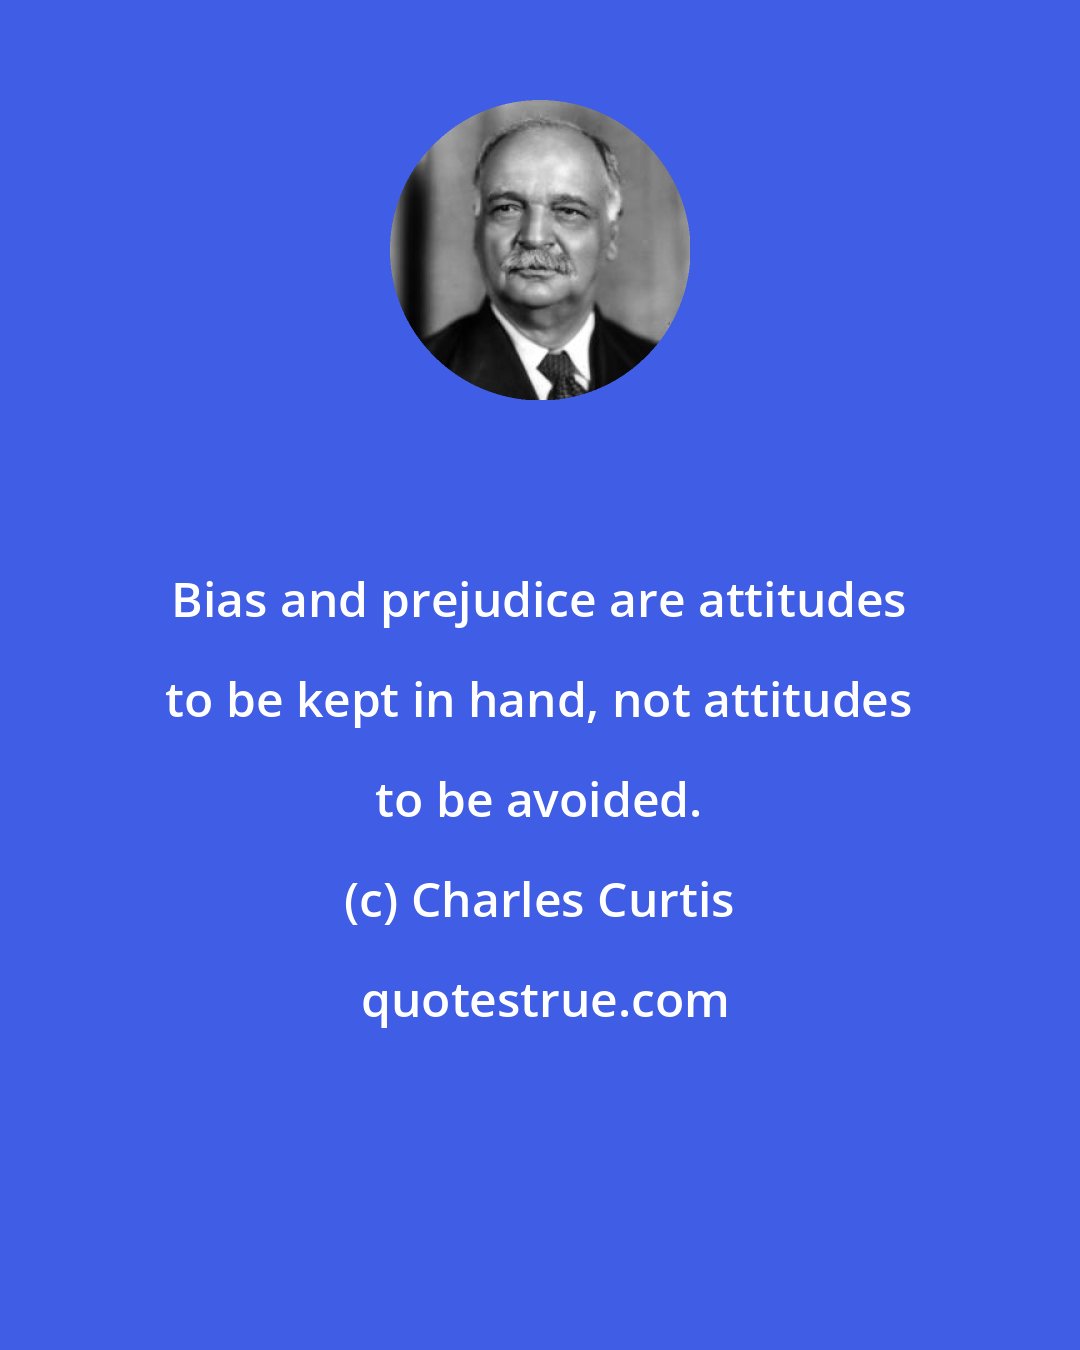 Charles Curtis: Bias and prejudice are attitudes to be kept in hand, not attitudes to be avoided.